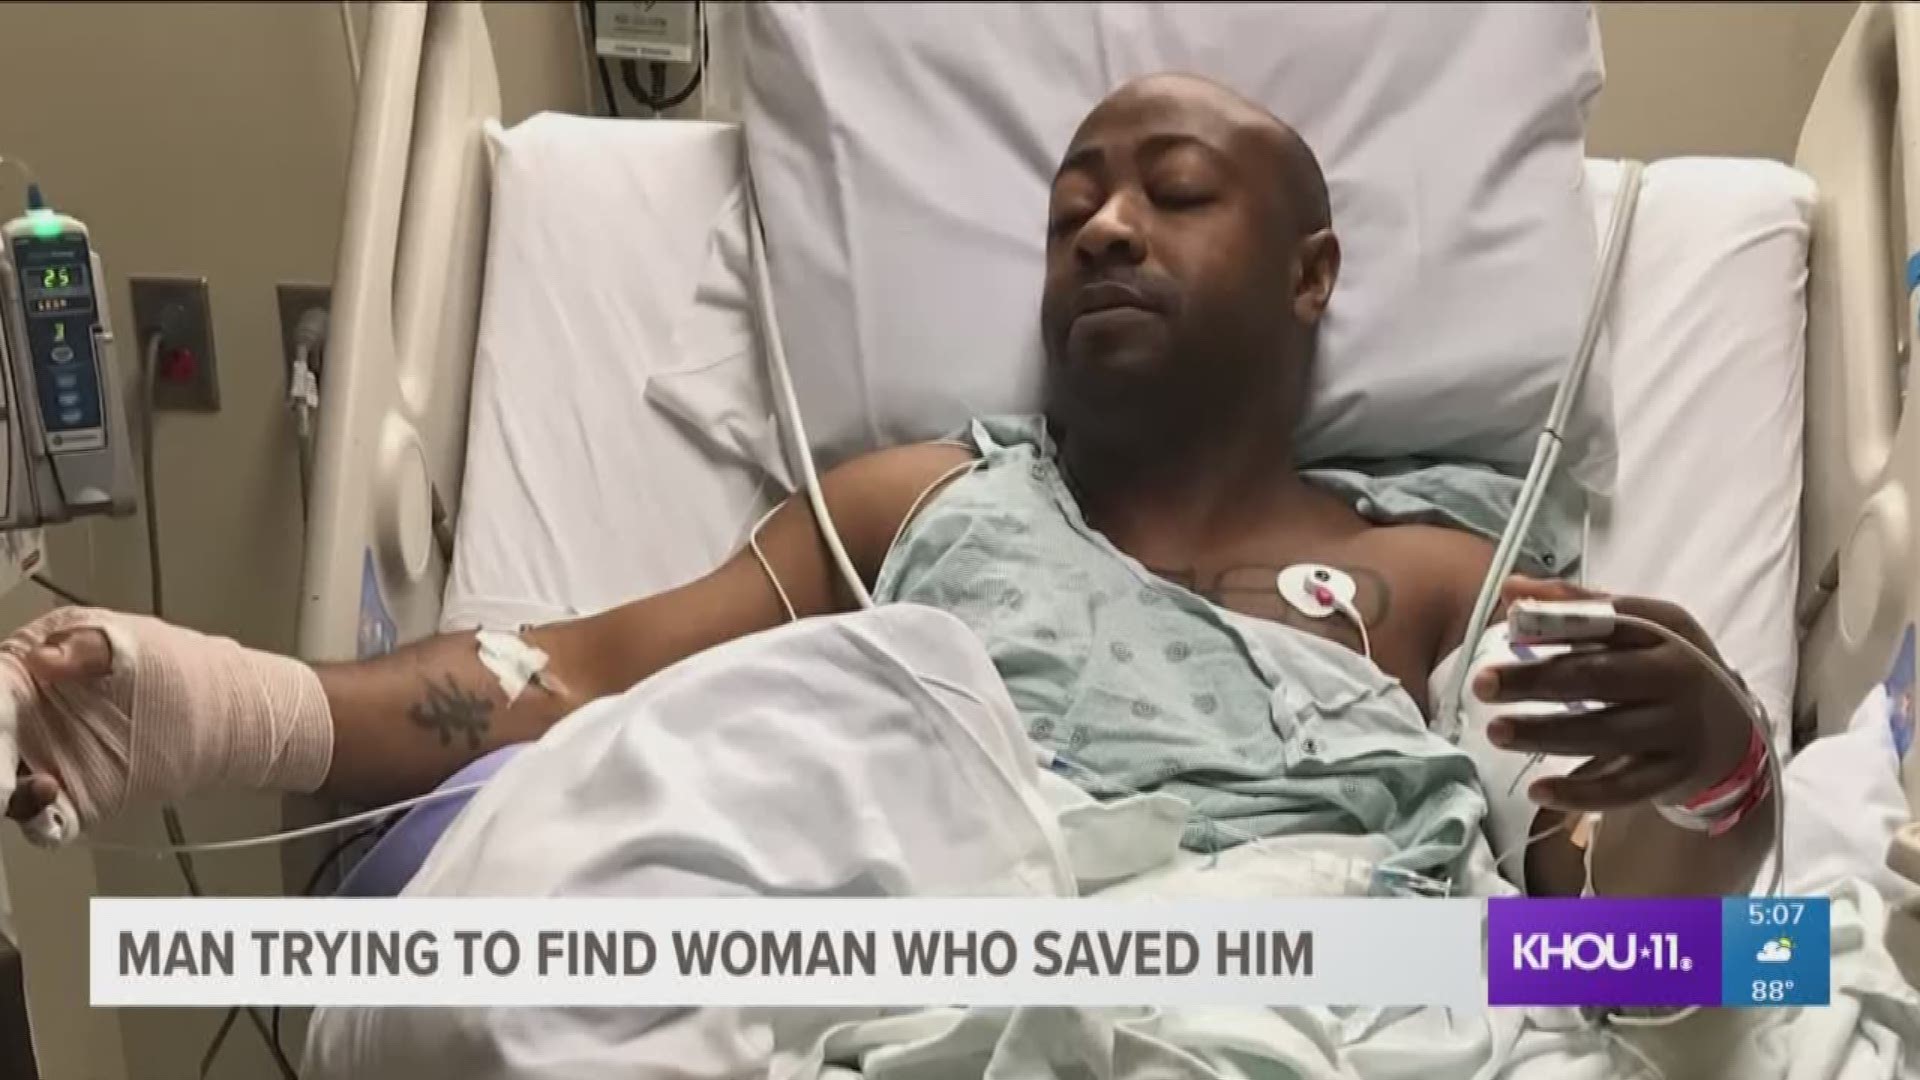 Nicholas Laye says his motorcycle crash was the most painful experience of his life, both physically and mentally. Laye had 11 surgeries in the first three months and wasn?t sure if doctors would have to amputate. He pulled through, however, and in a rema